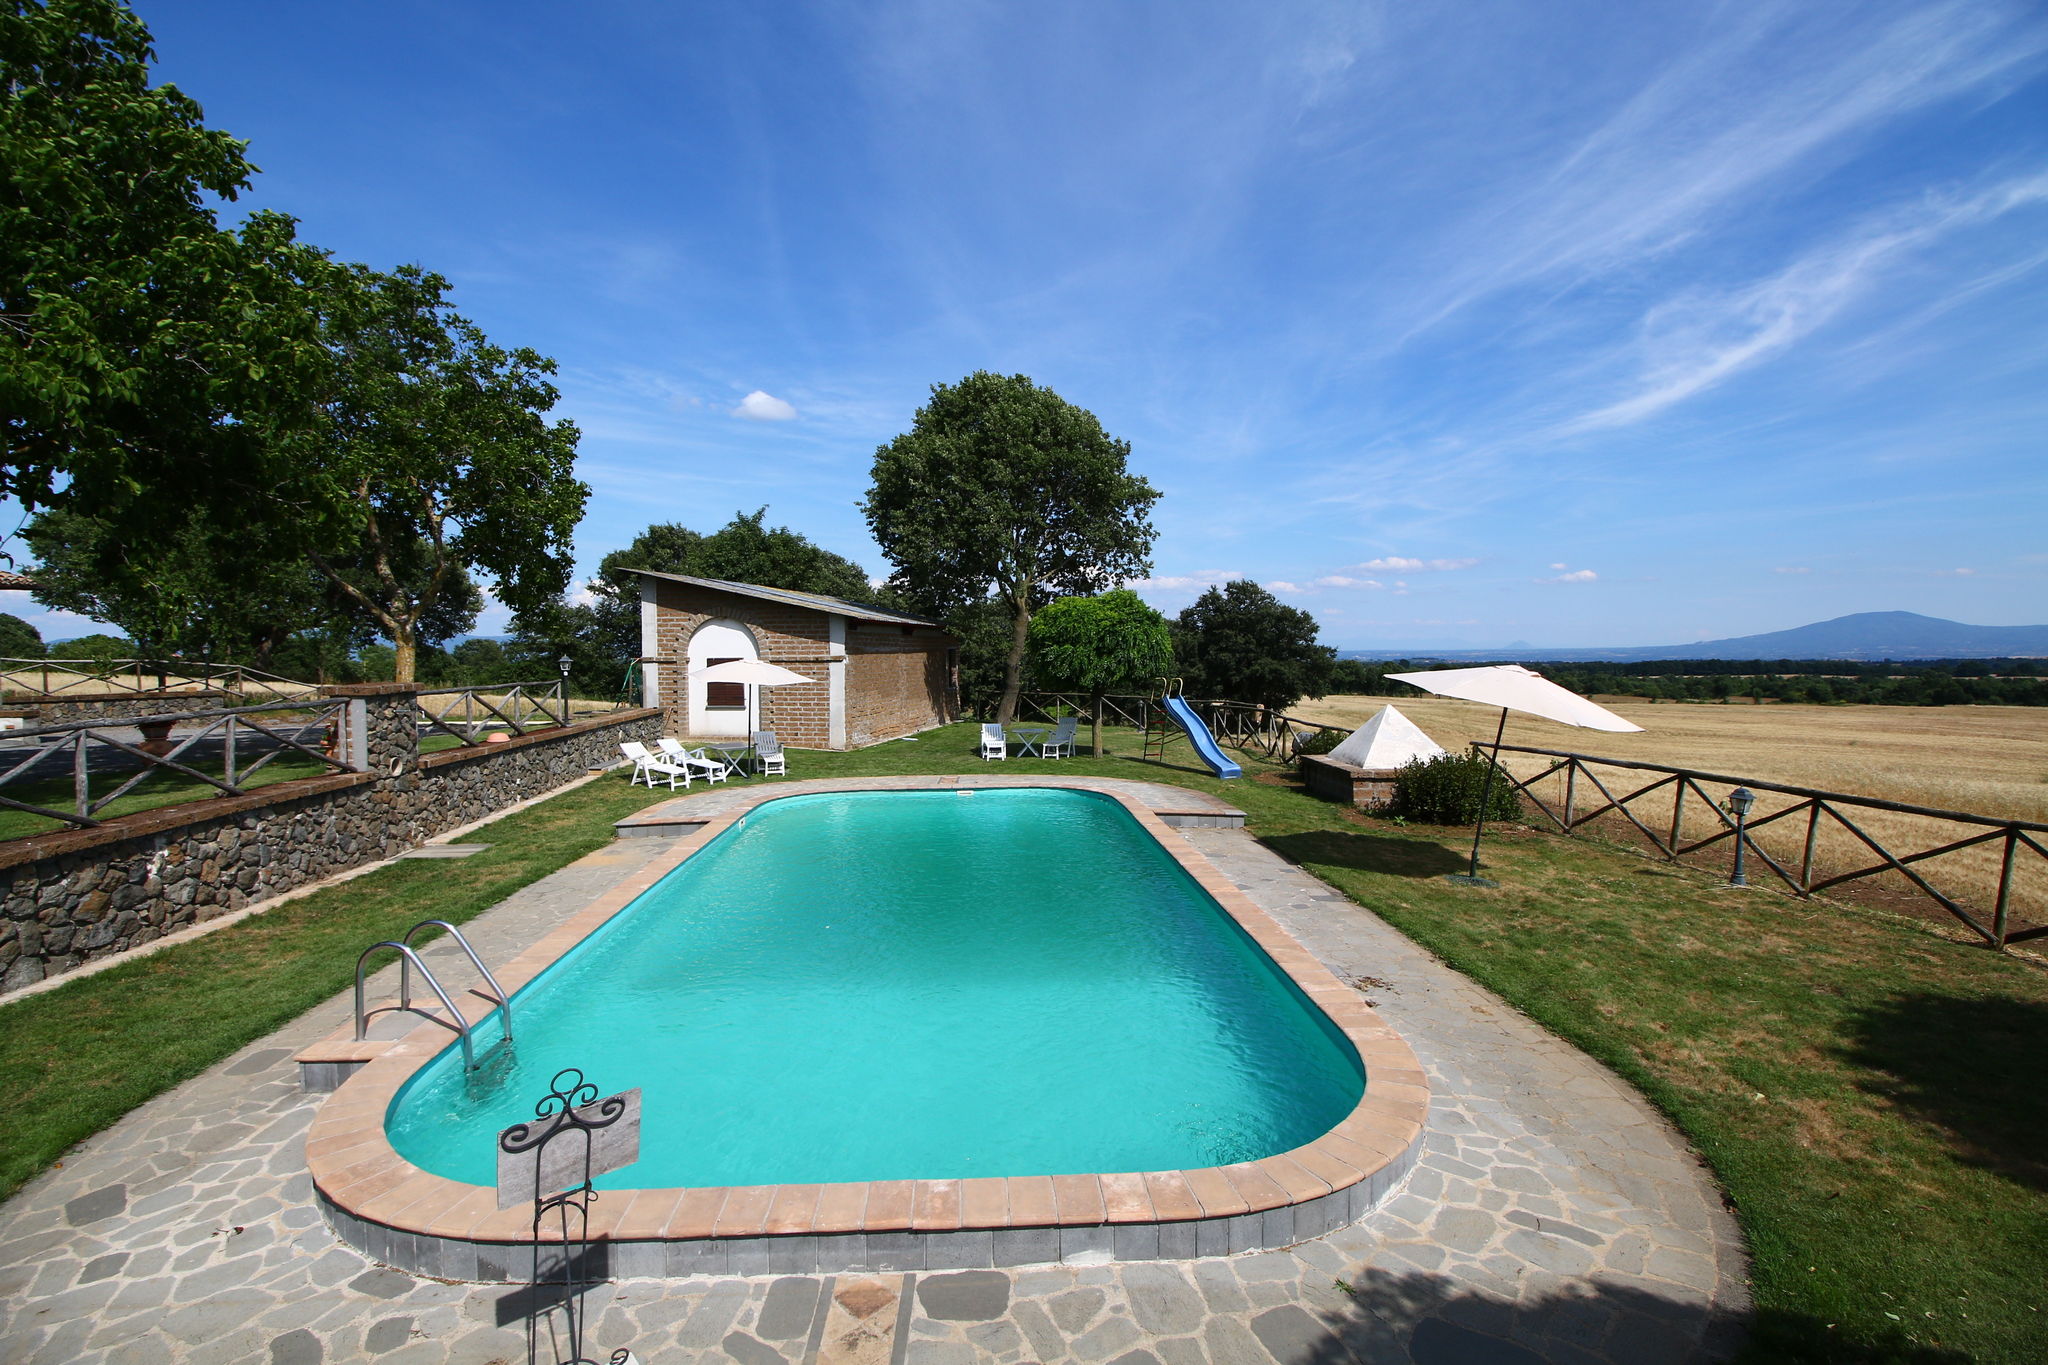 Farmhouse with pool in an area with history, nature and art

